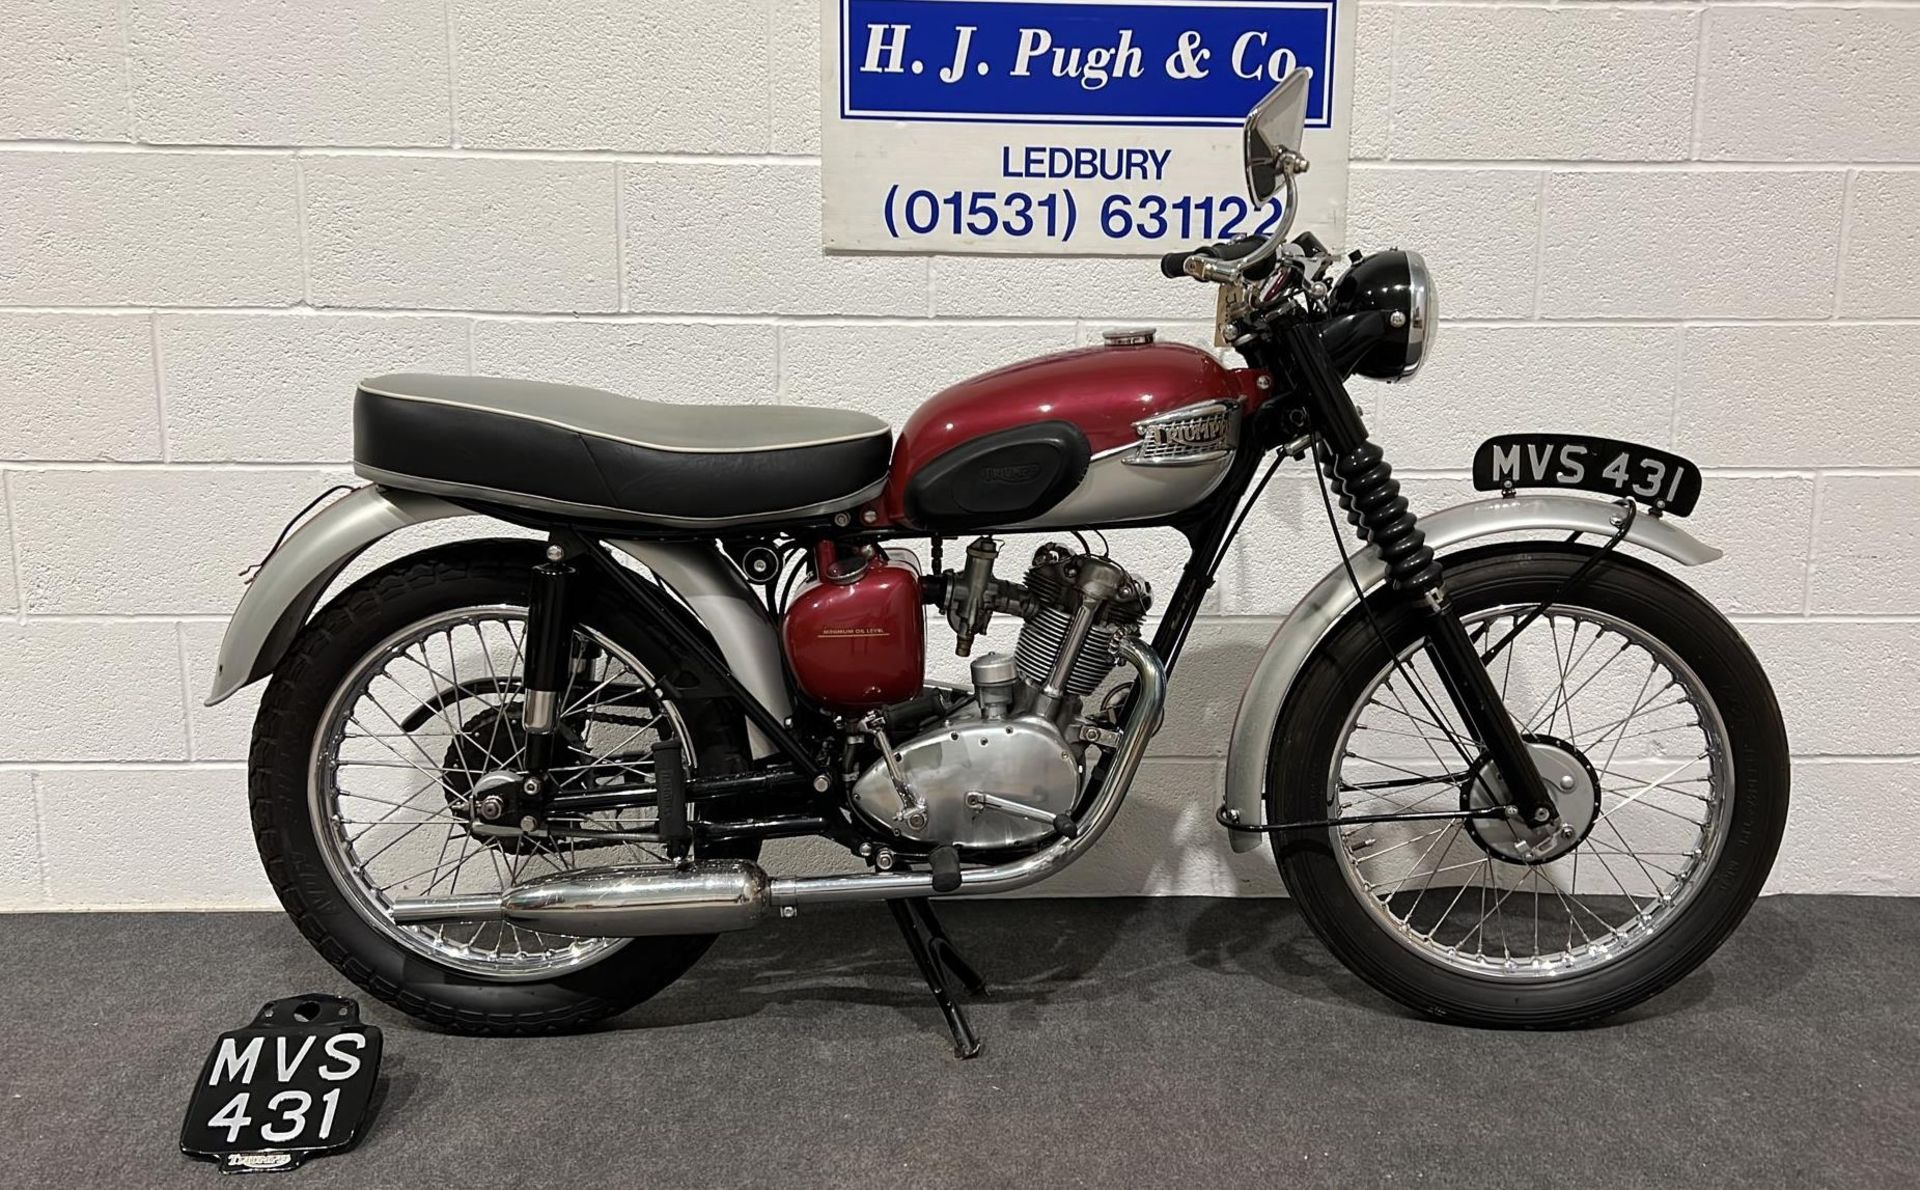 Triumph Tiger cub motorcycle. 1961. 199cc. Frame no. T-76741 Engine no. T2076741 Property of a - Image 6 of 7